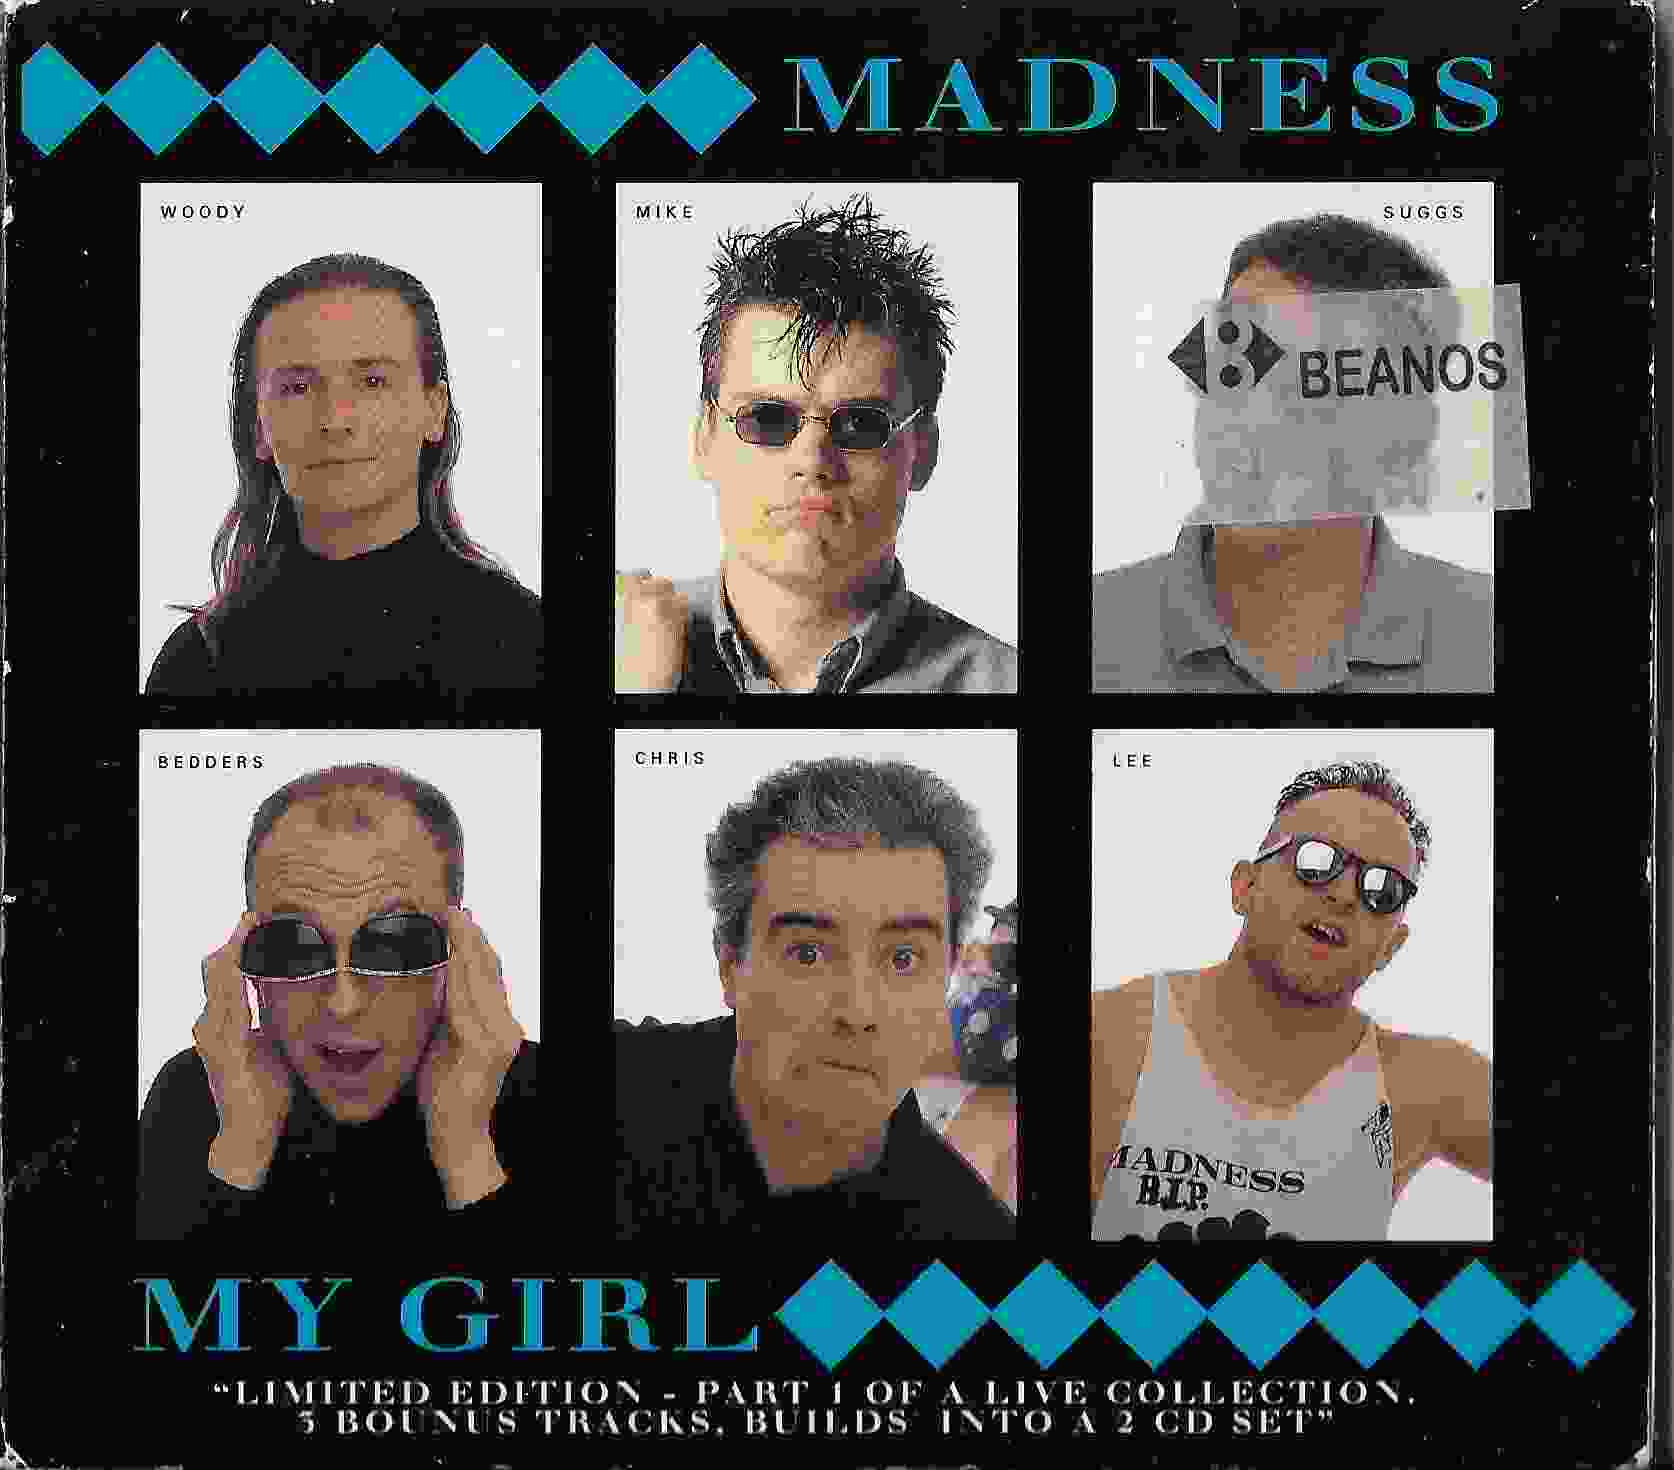 Picture of VSCDG 1425 My girl - Limited edition by artist Madness 